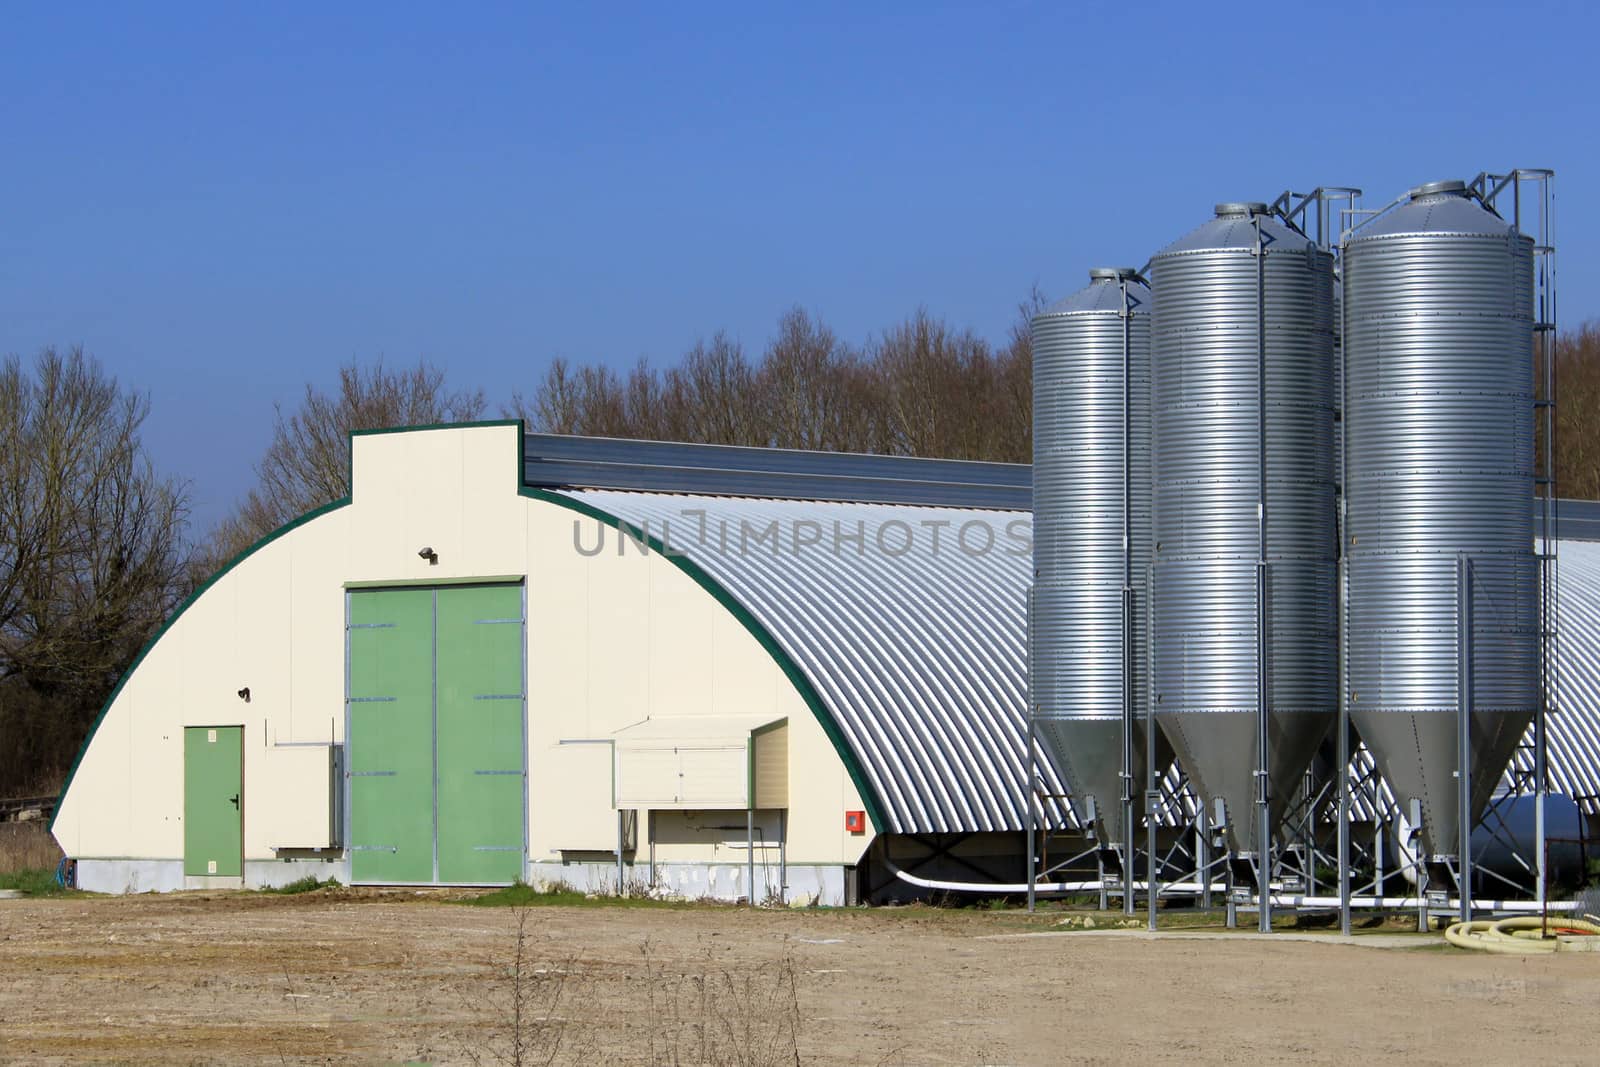 photo of a barn with grain silos for breeding hens and chickens